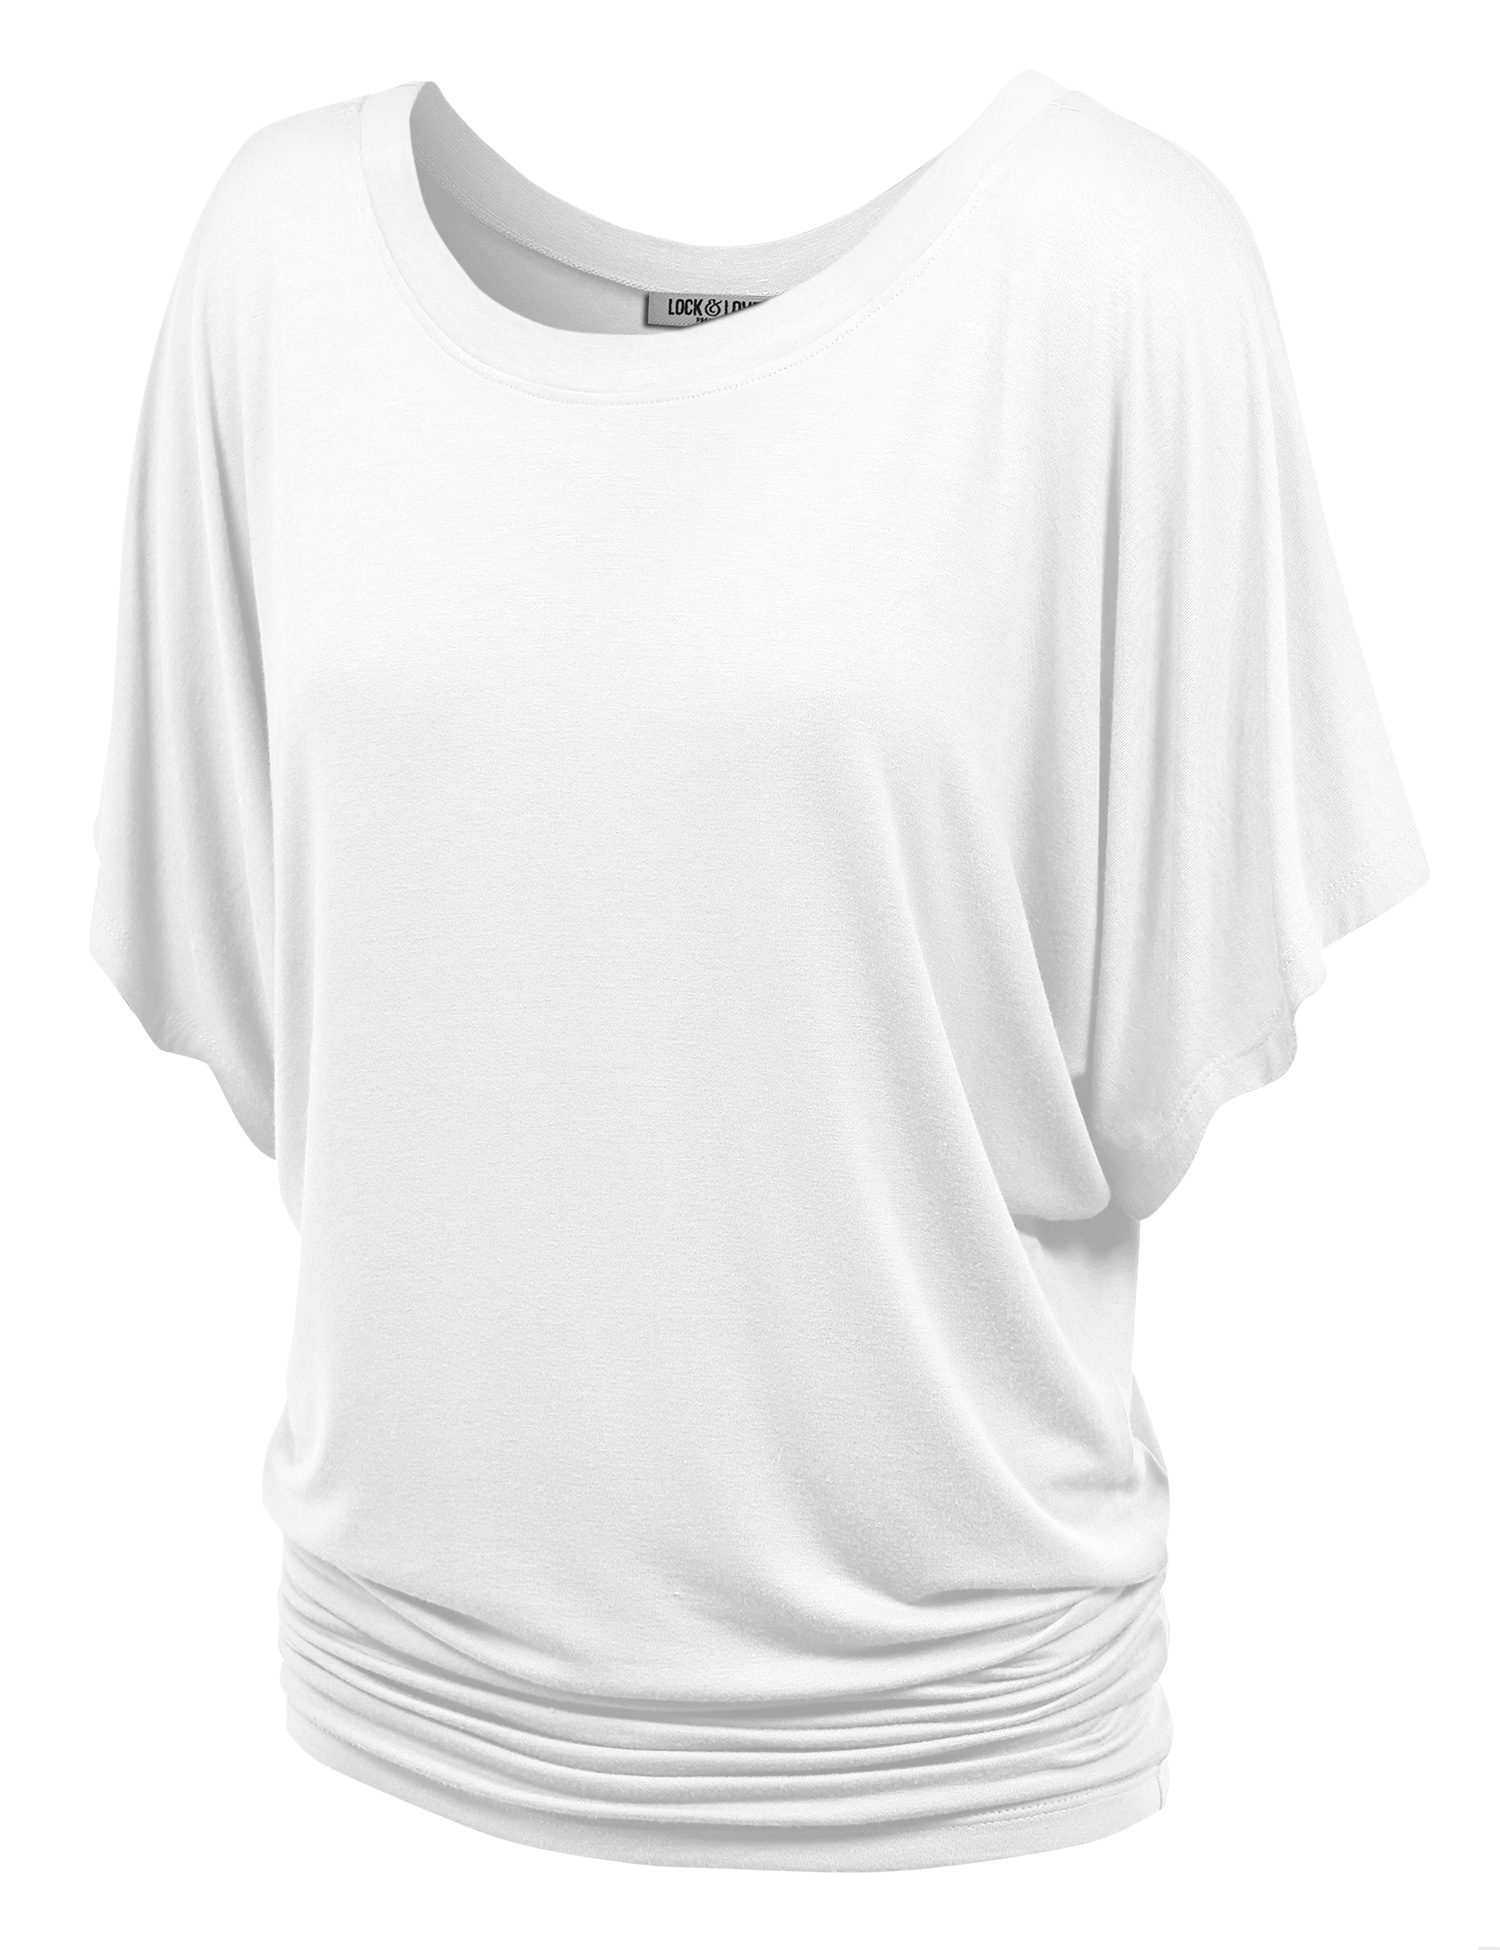 Made by Johnny Women's Boat Neck Short Sleeve Dolman Drape Top S WHITE - image 1 of 6